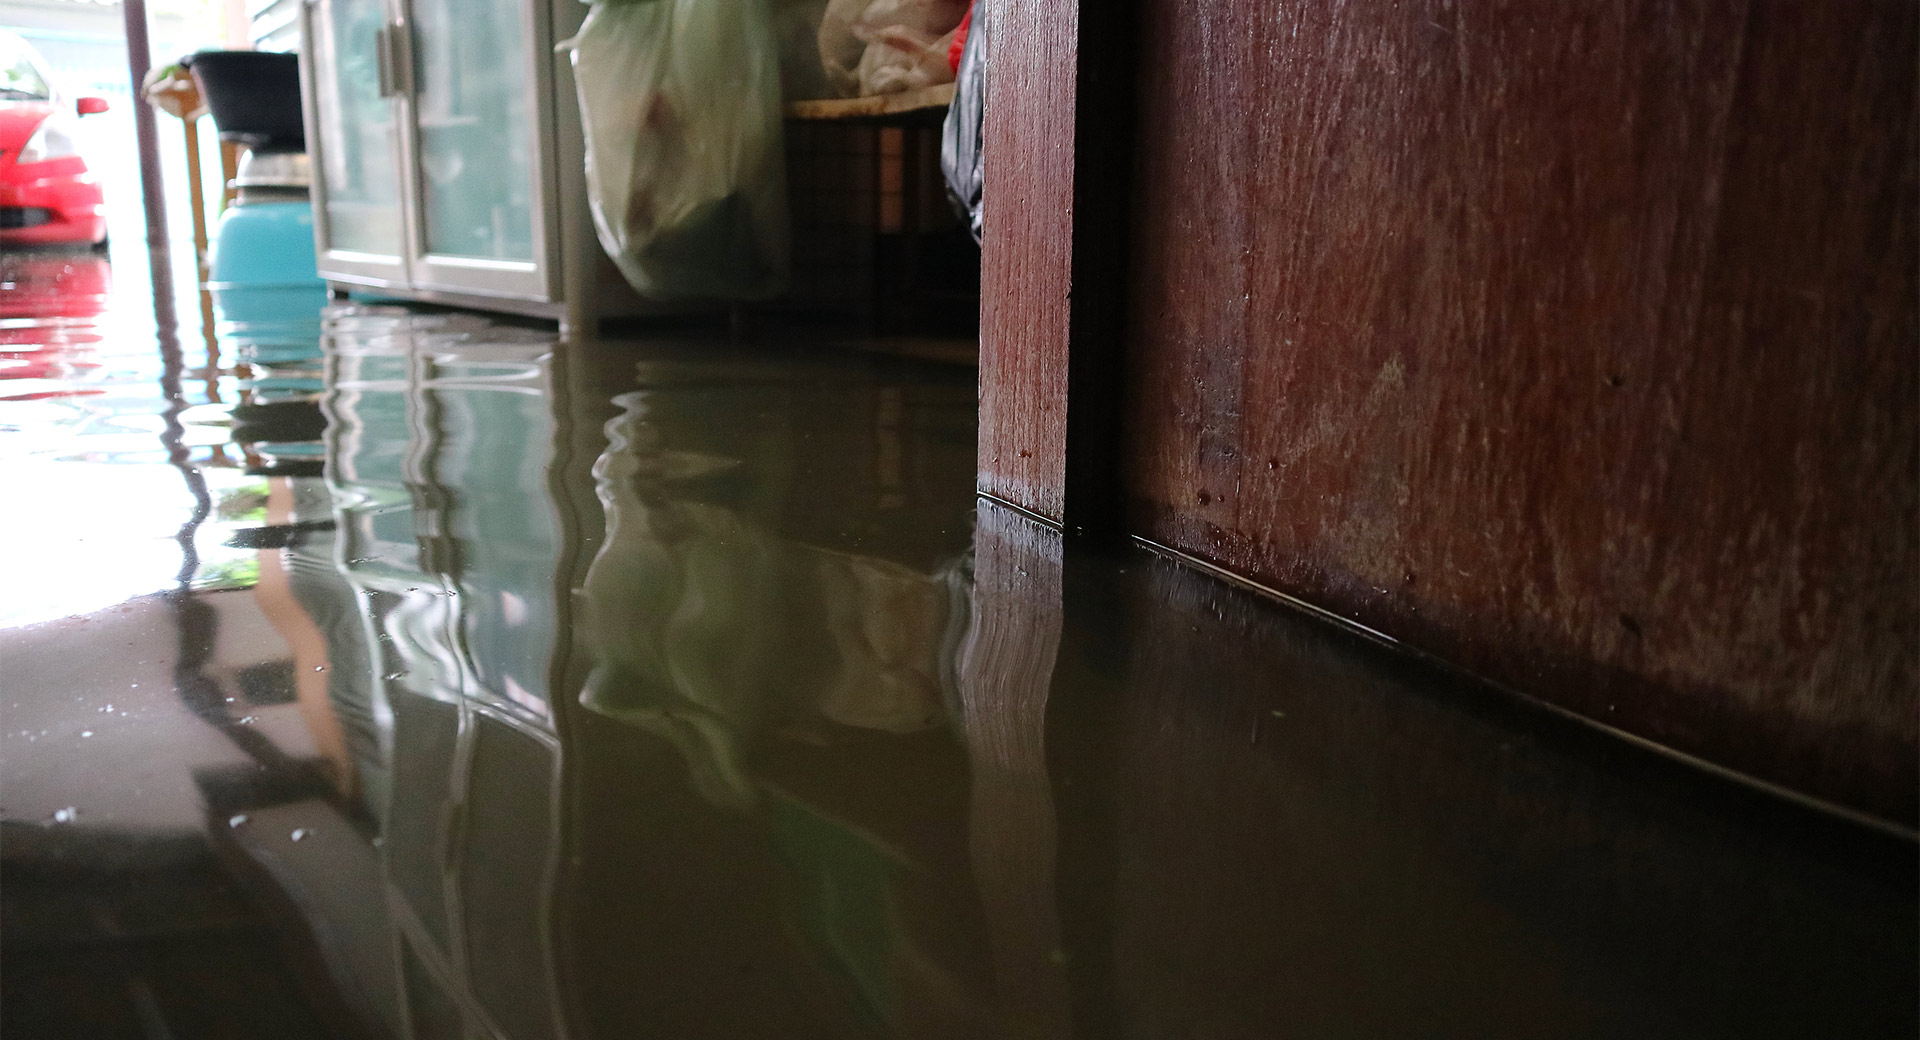 A flooded property with water on the floor
                        